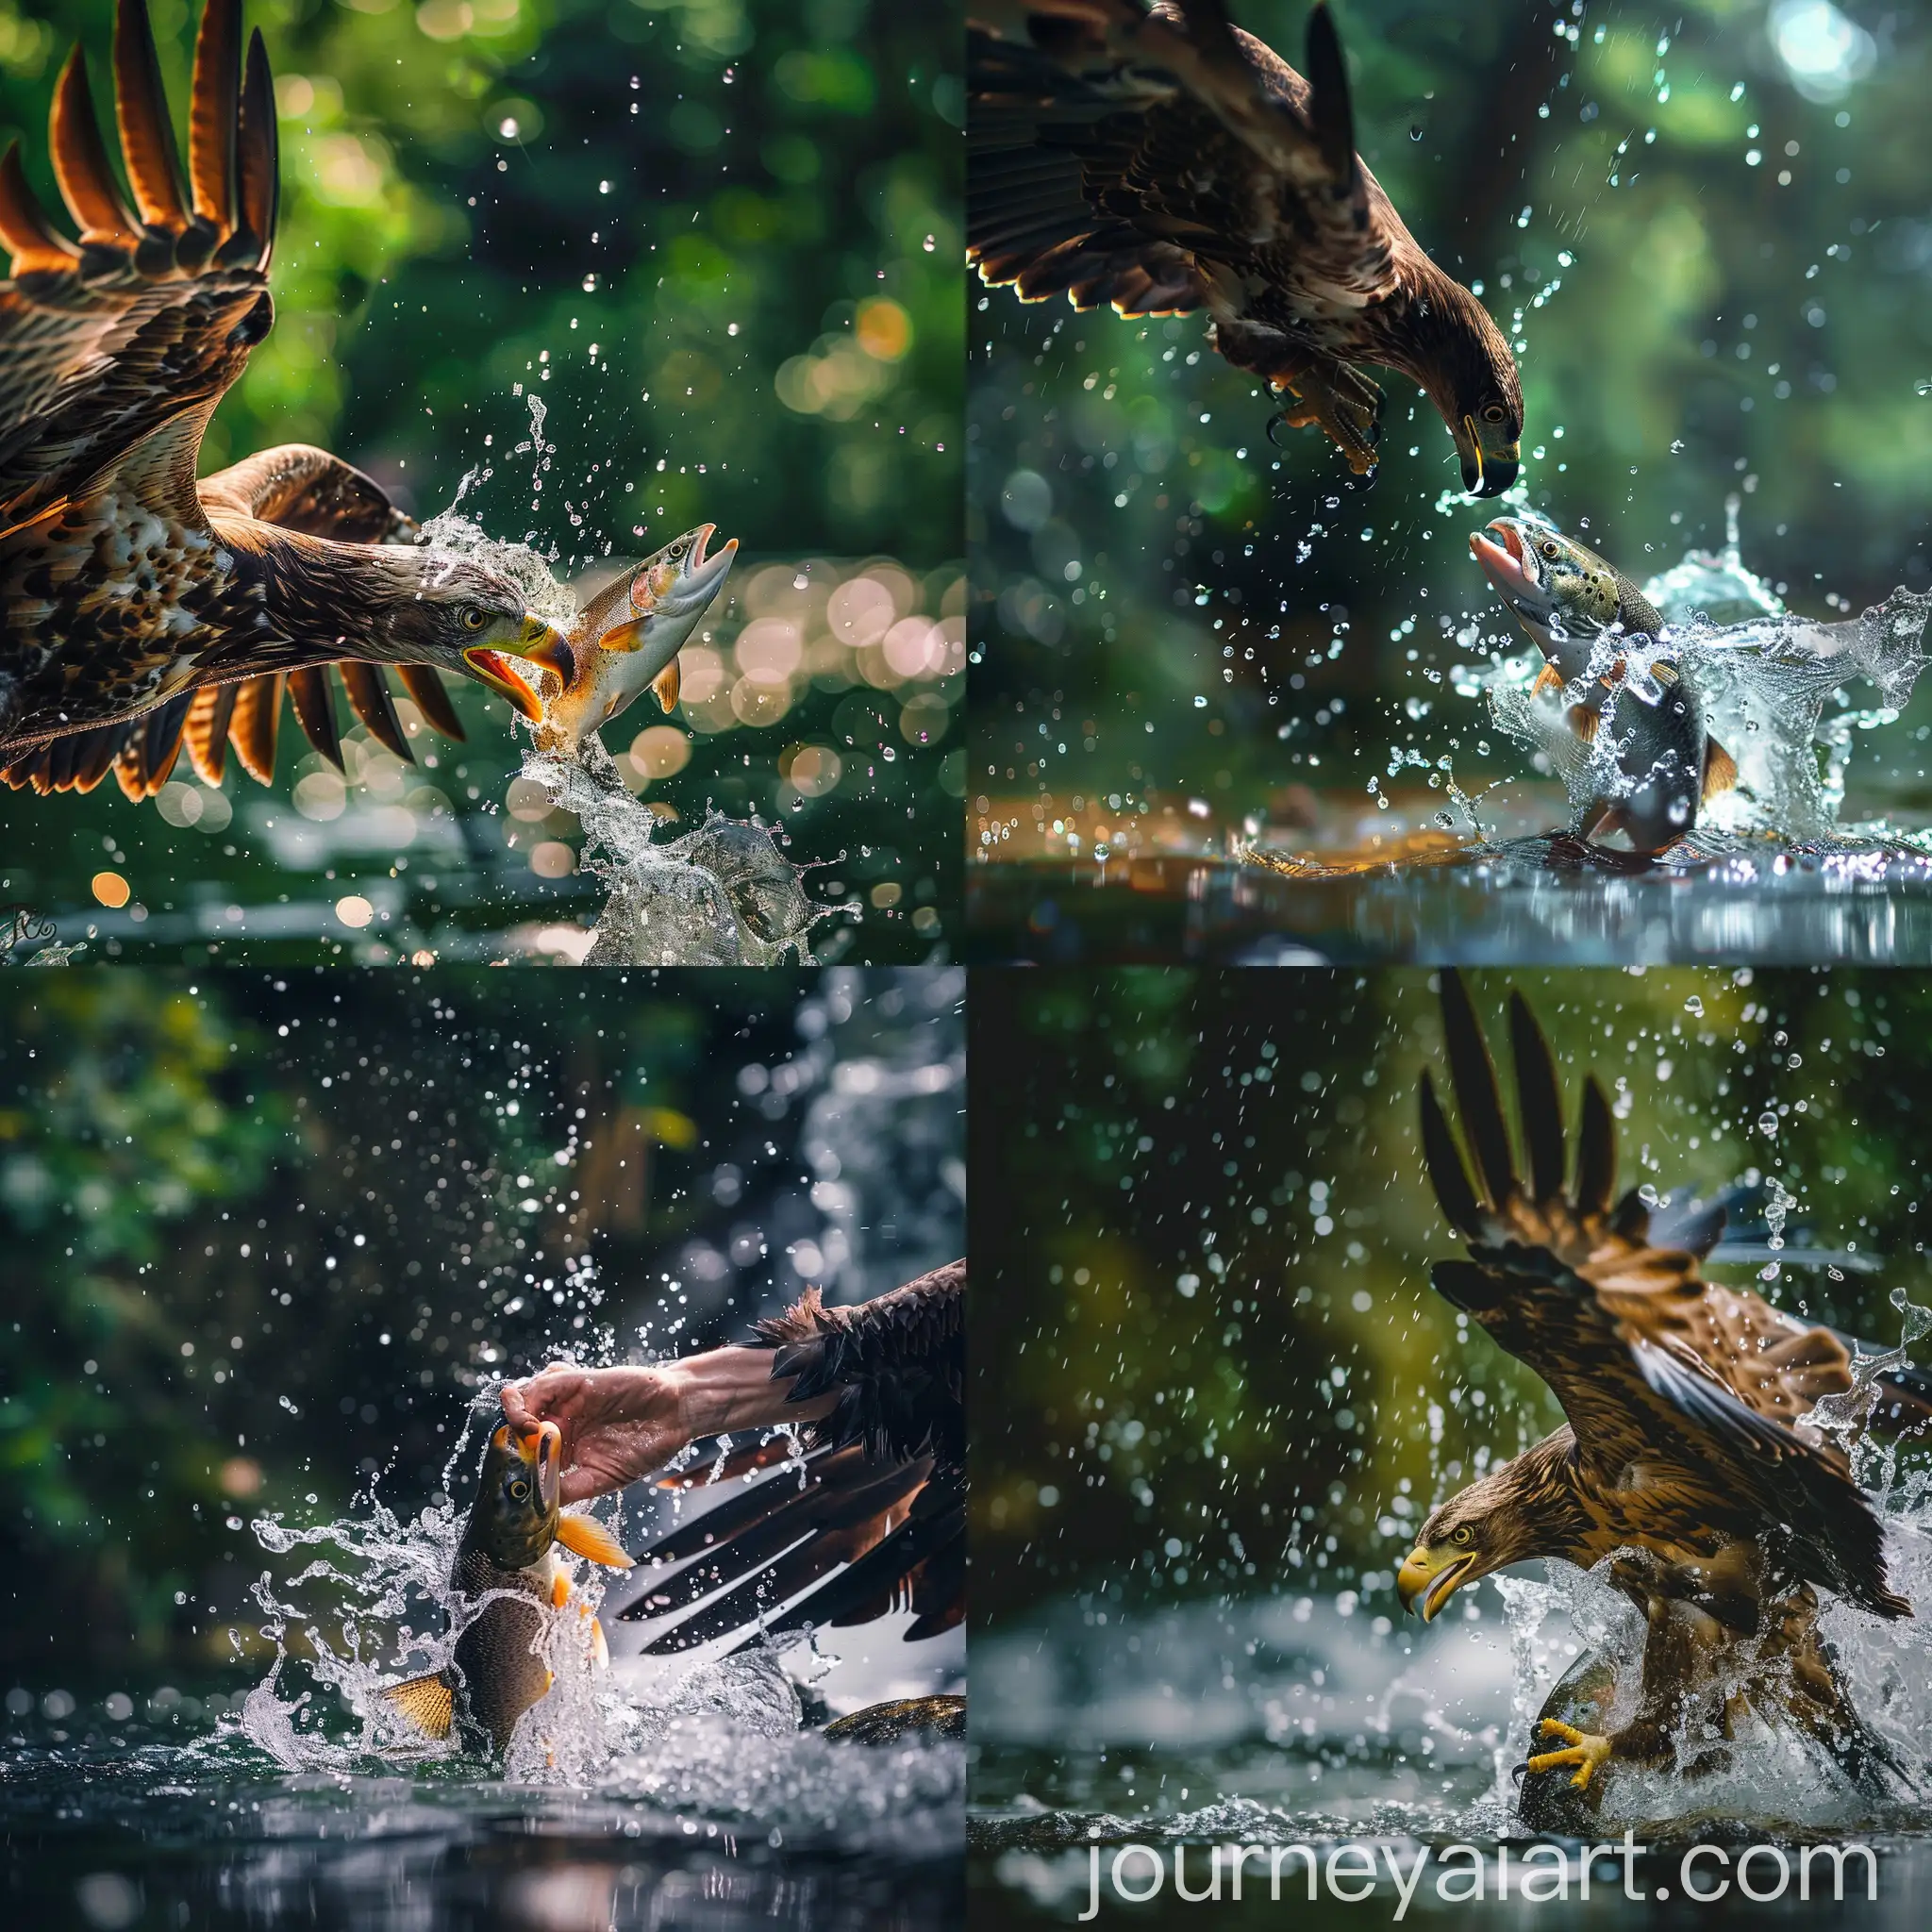 Eagle-Claws-Gripping-Salmon-Fish-in-River-Splash